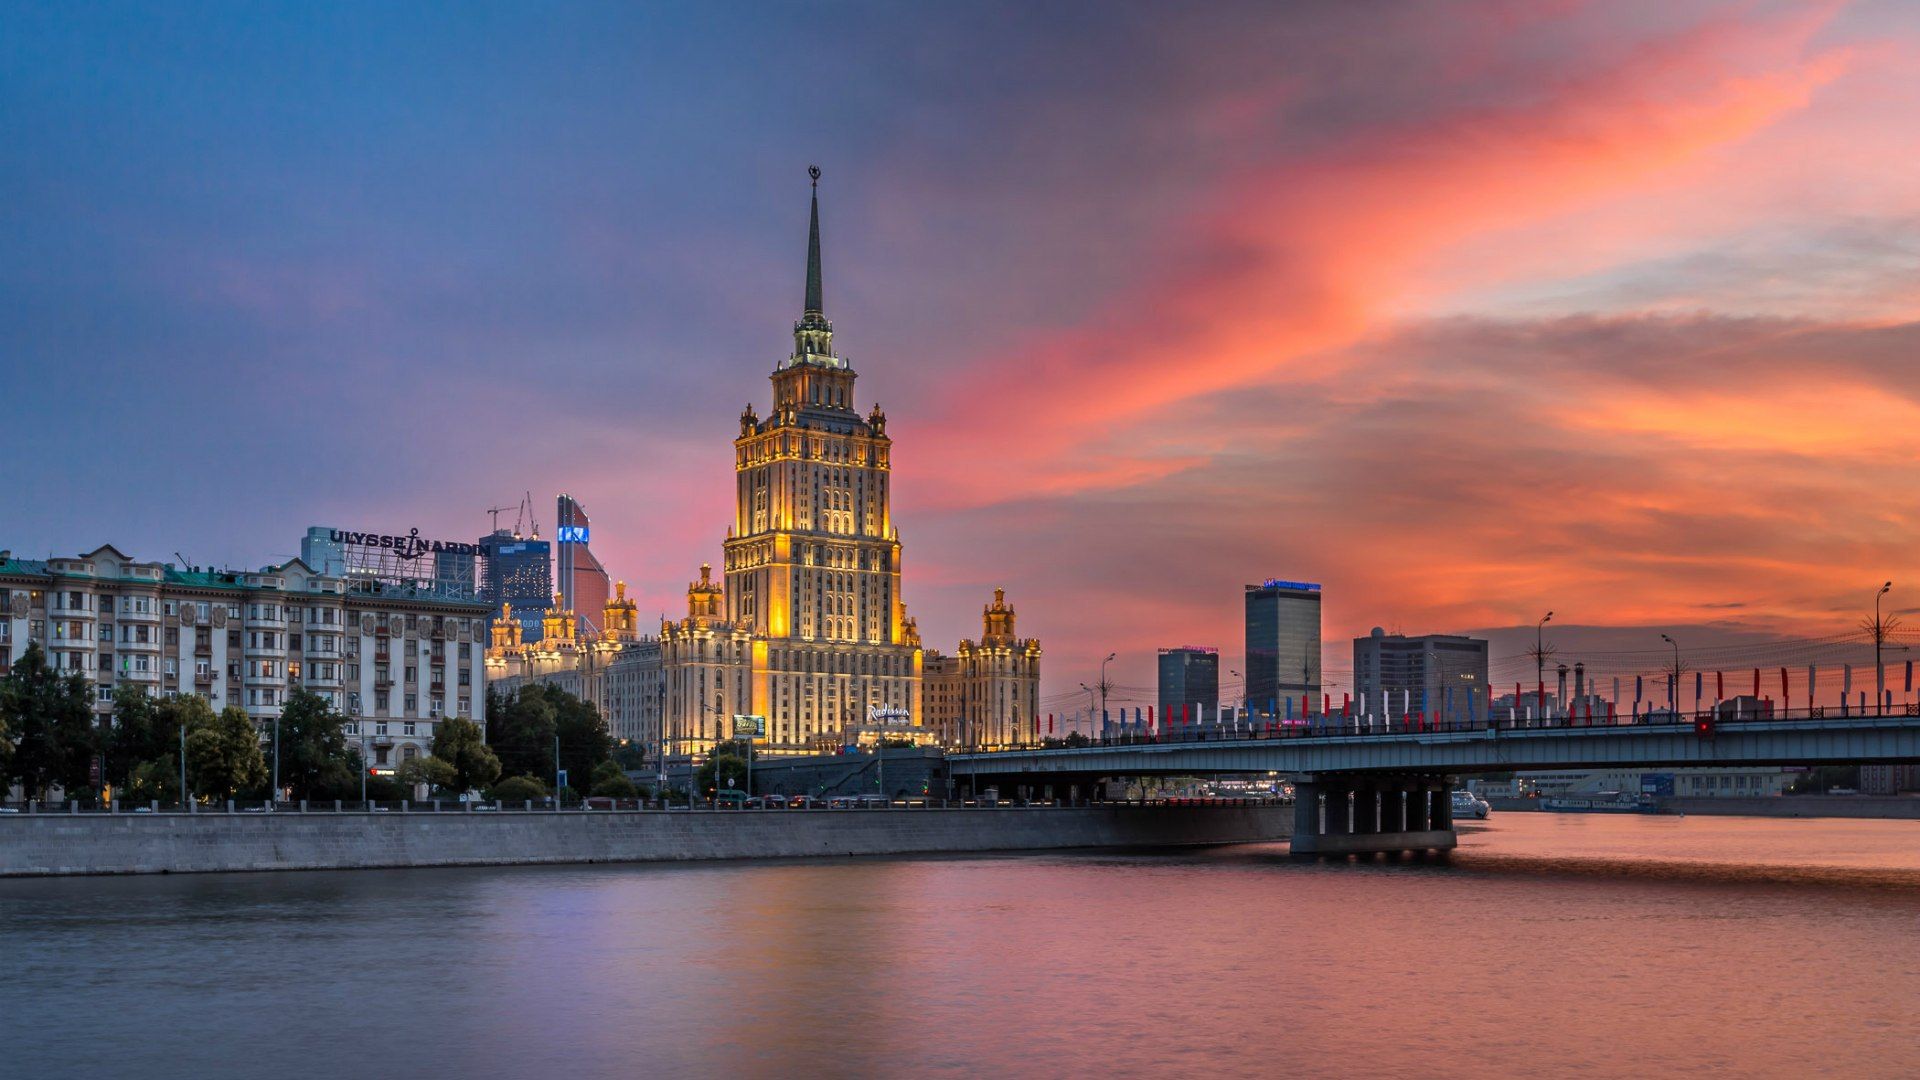 Hotel Ukraine in Moscow wallpaper and image